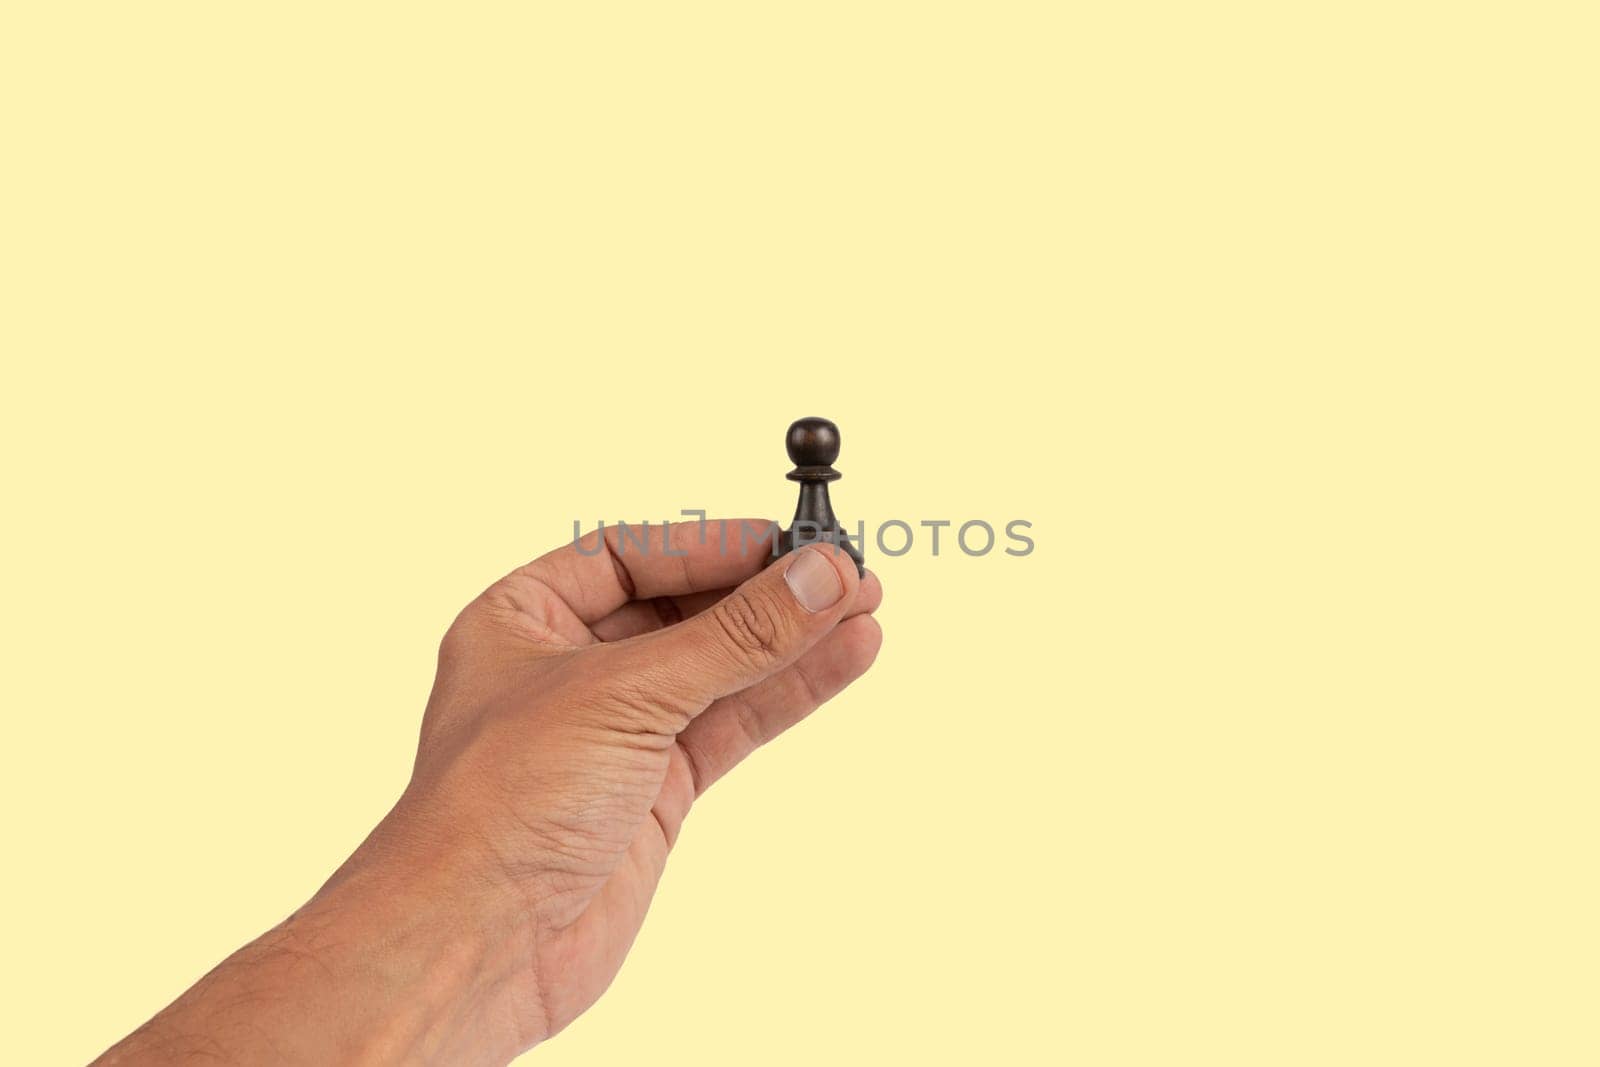 Isolated hand holding a chess figure on yellow background. High quality photo